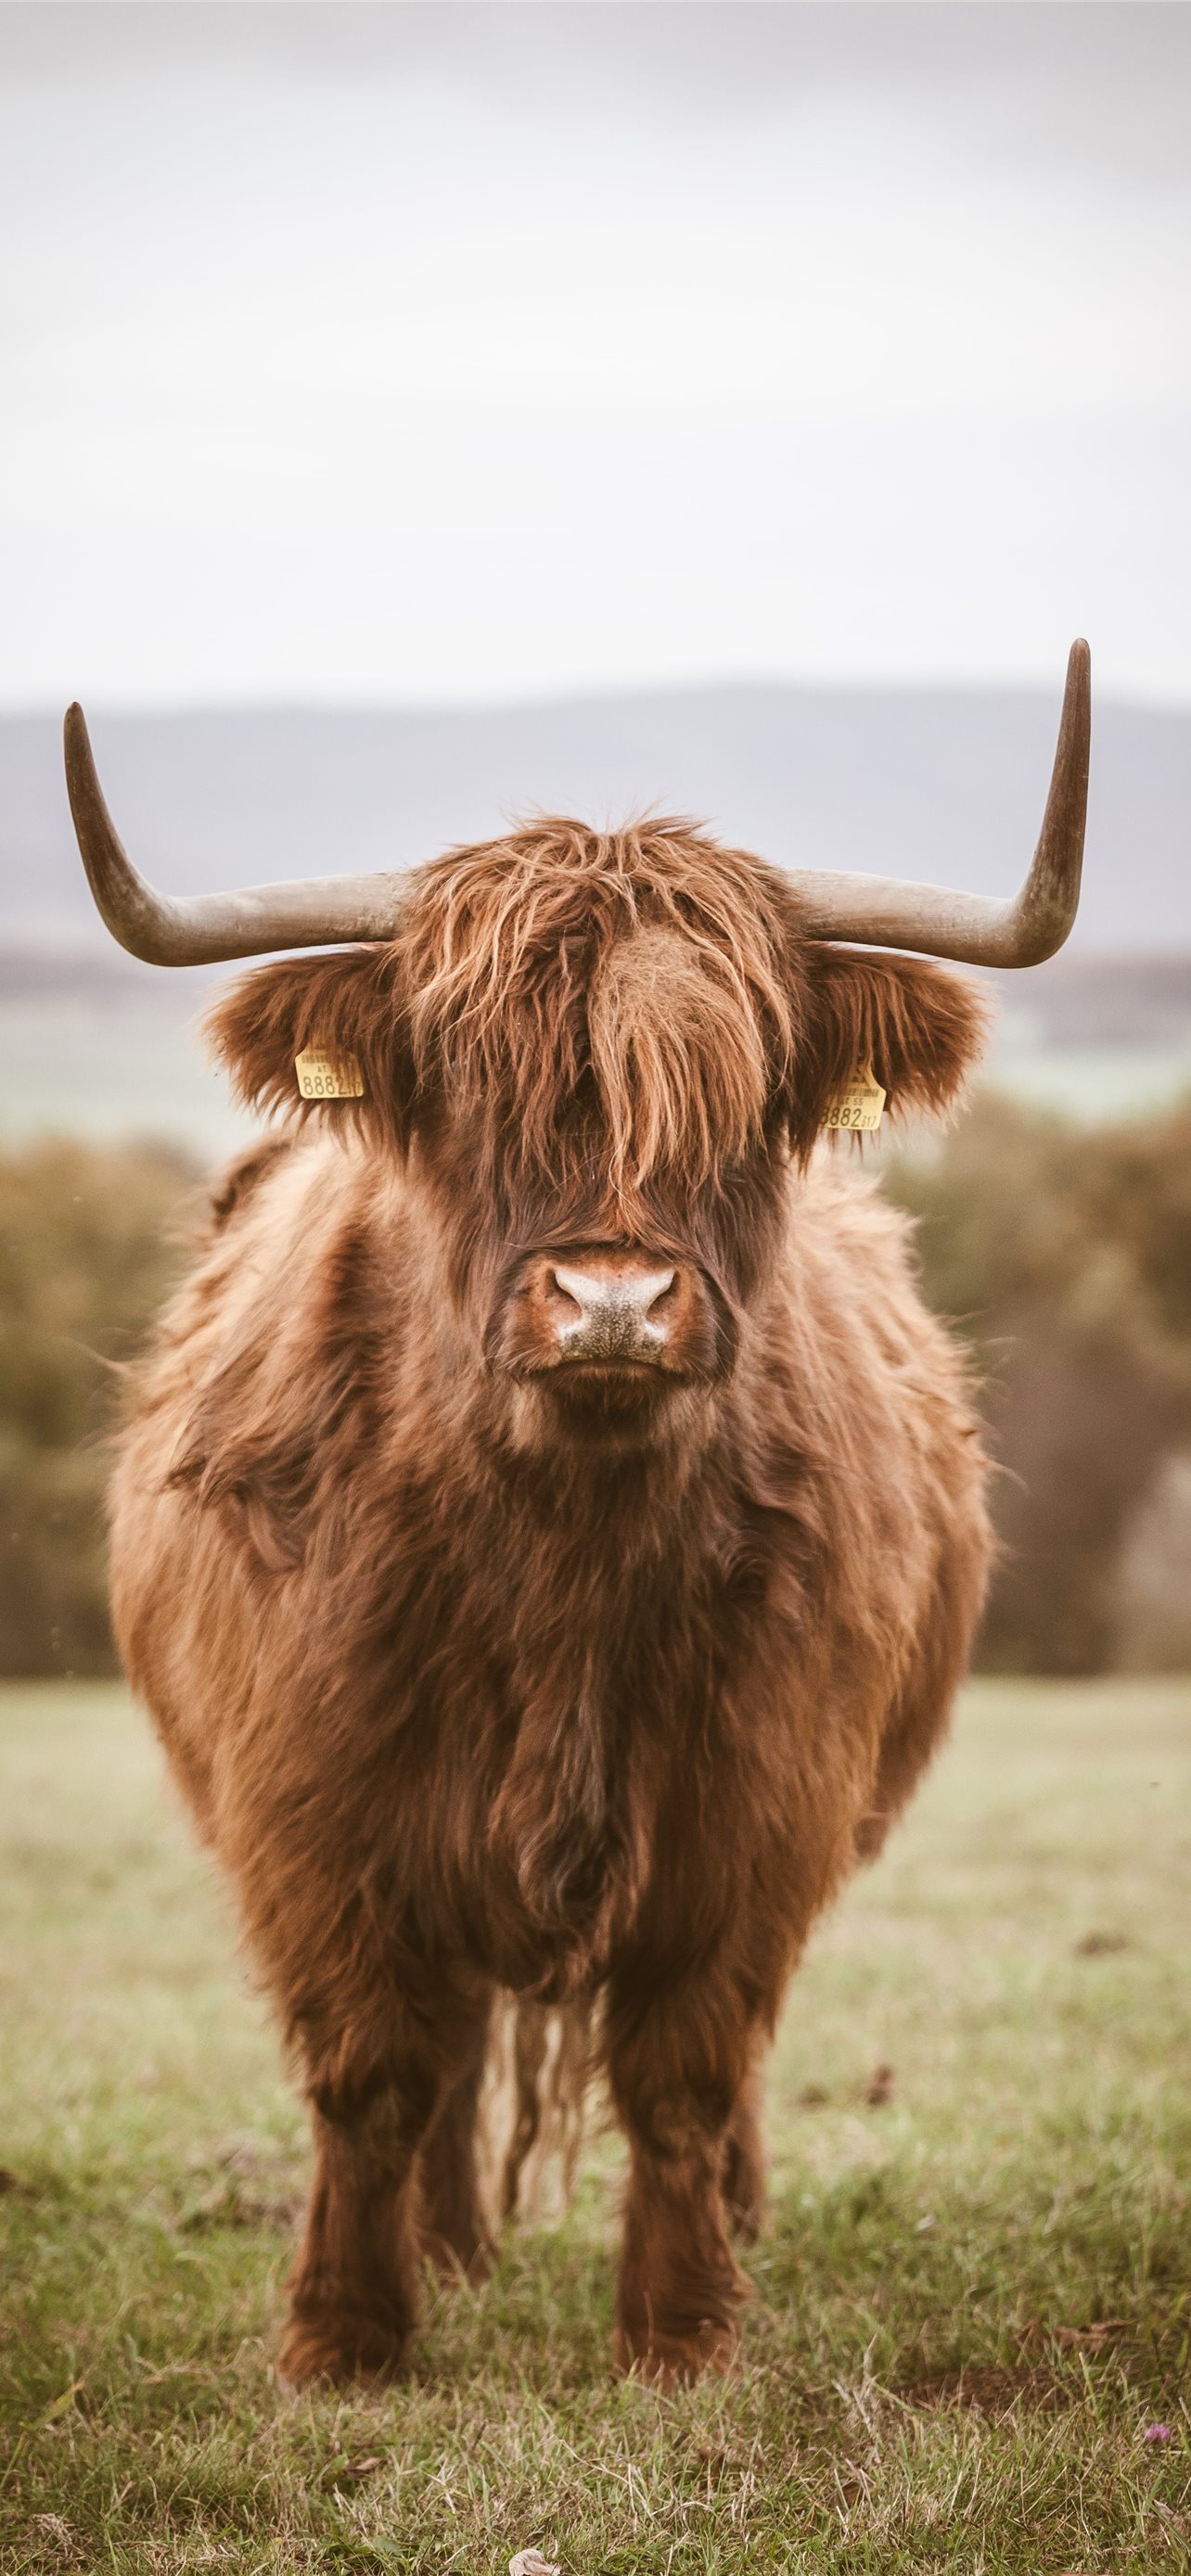 highland cow iPhone Wallpaper Free Download